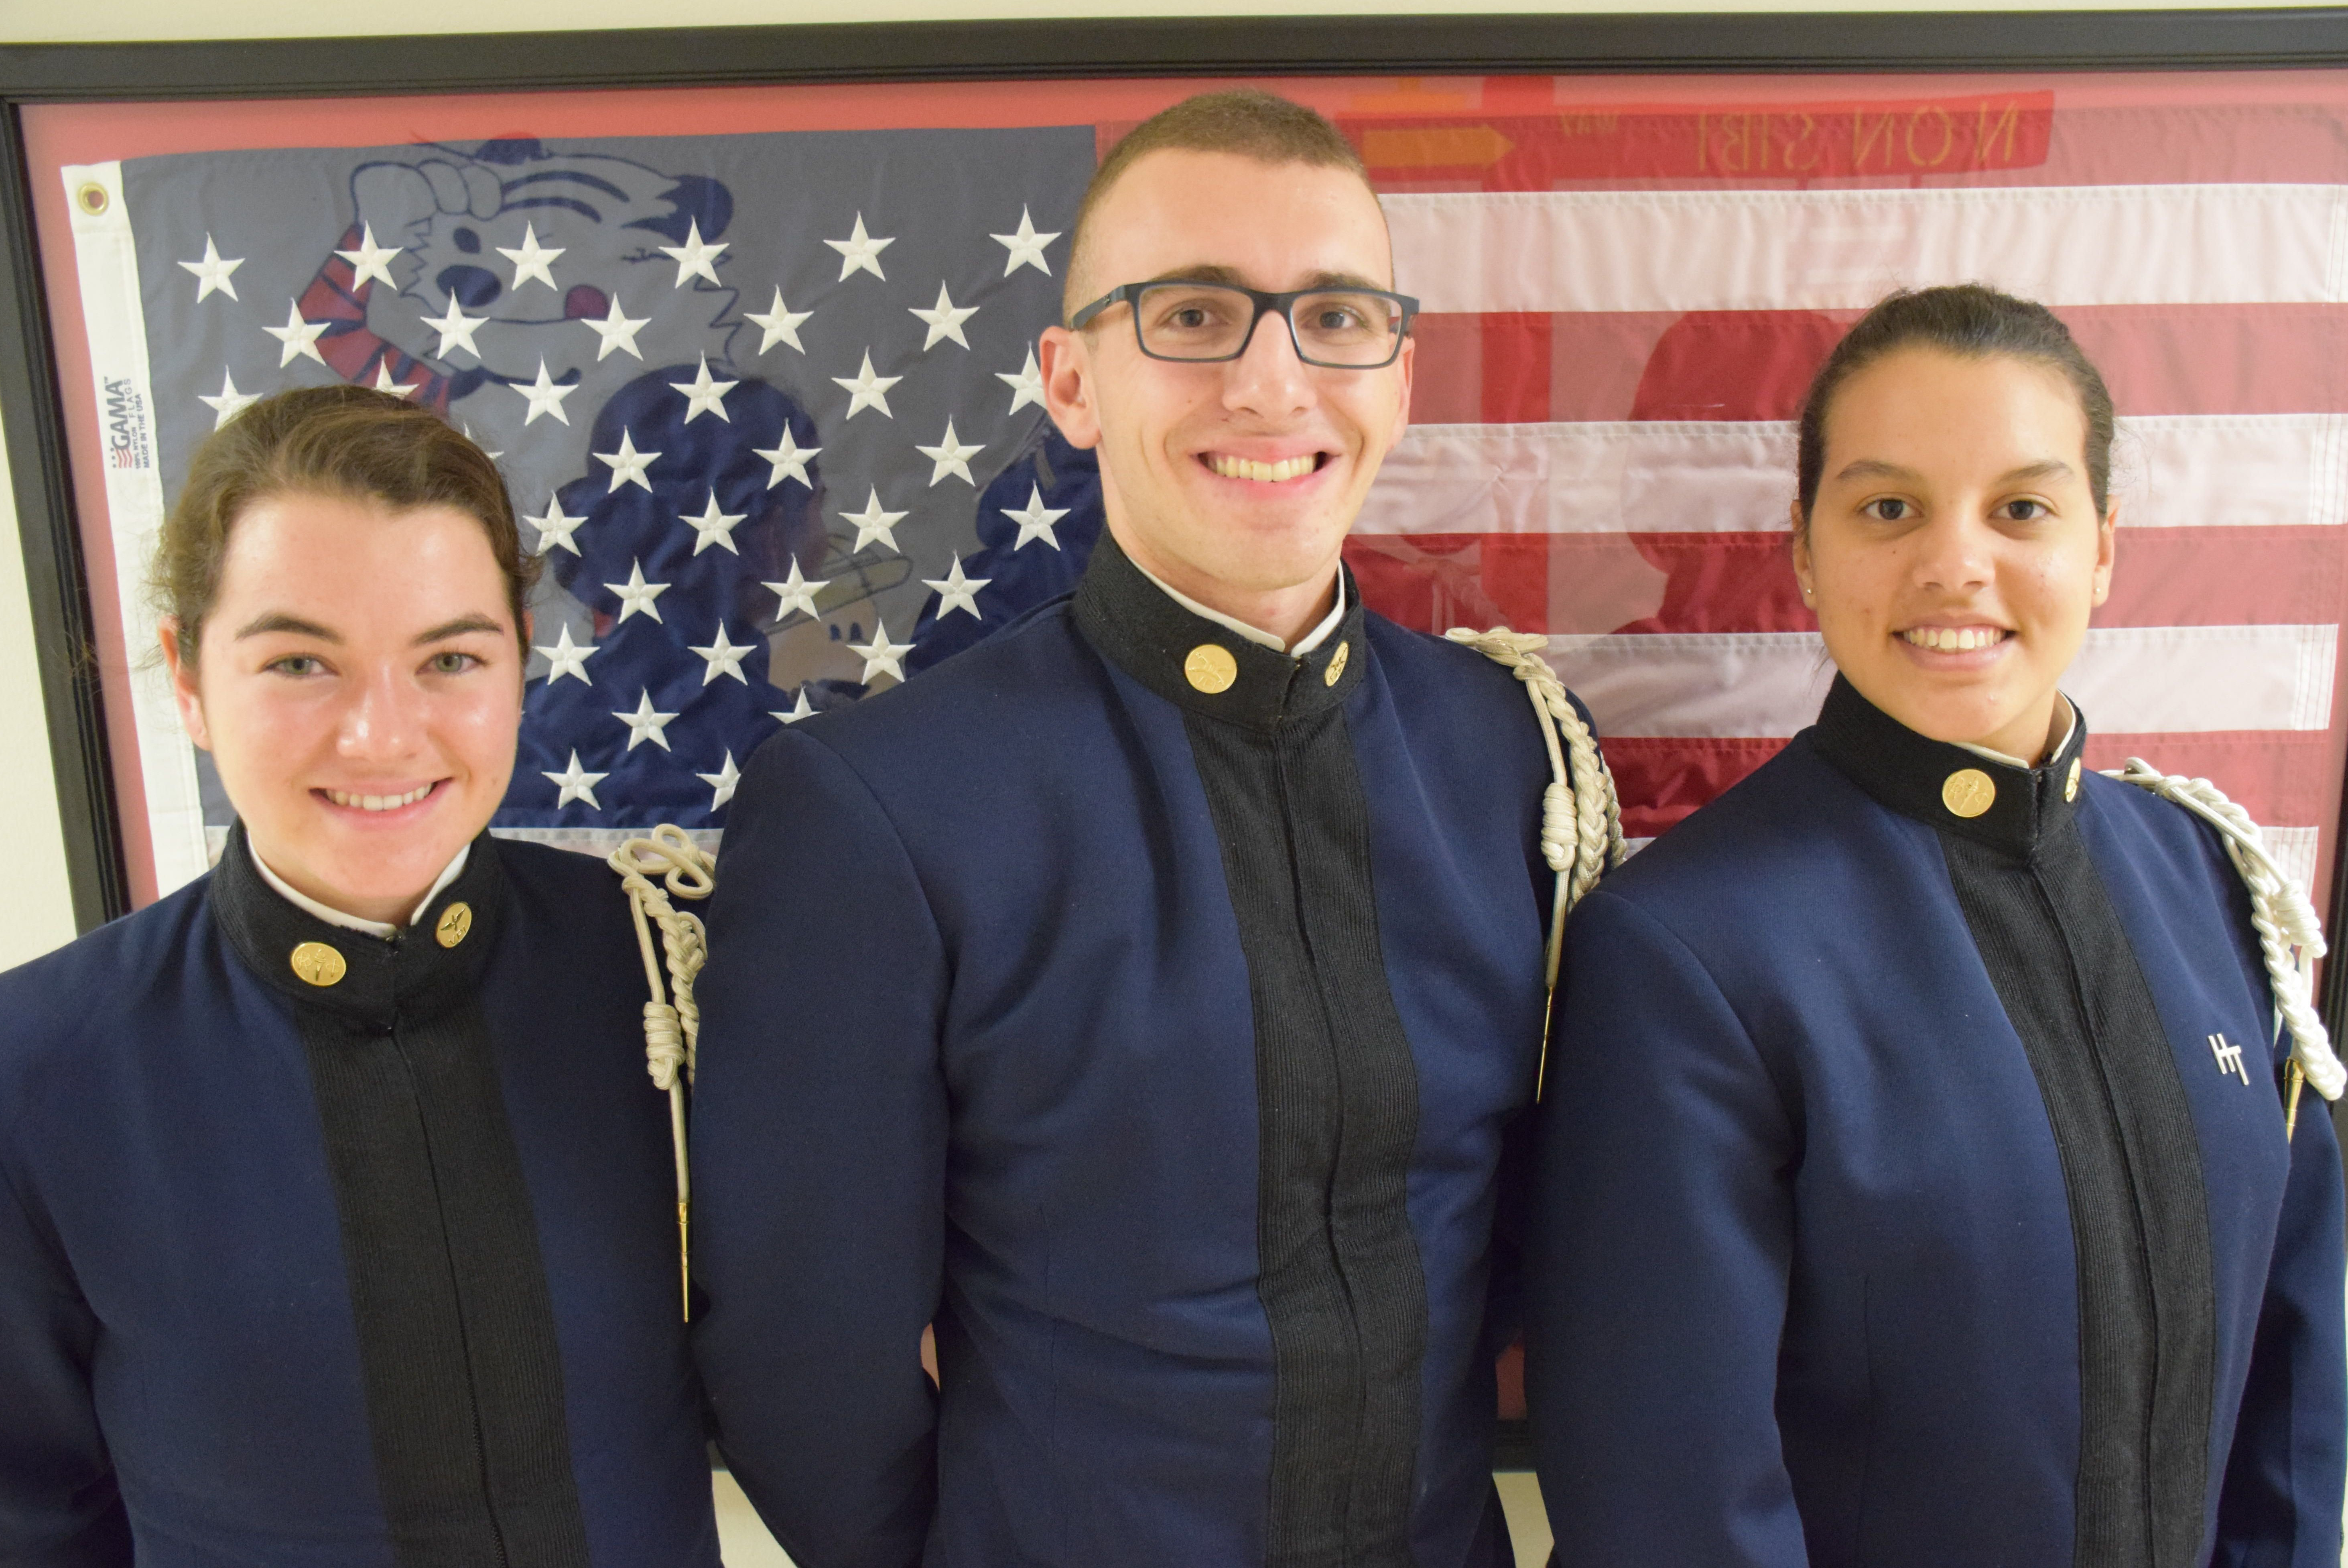 From left to right are Cadets Colleen Pramenko, Daniel Rhoades, and Samantha Velazquez-Martinez.